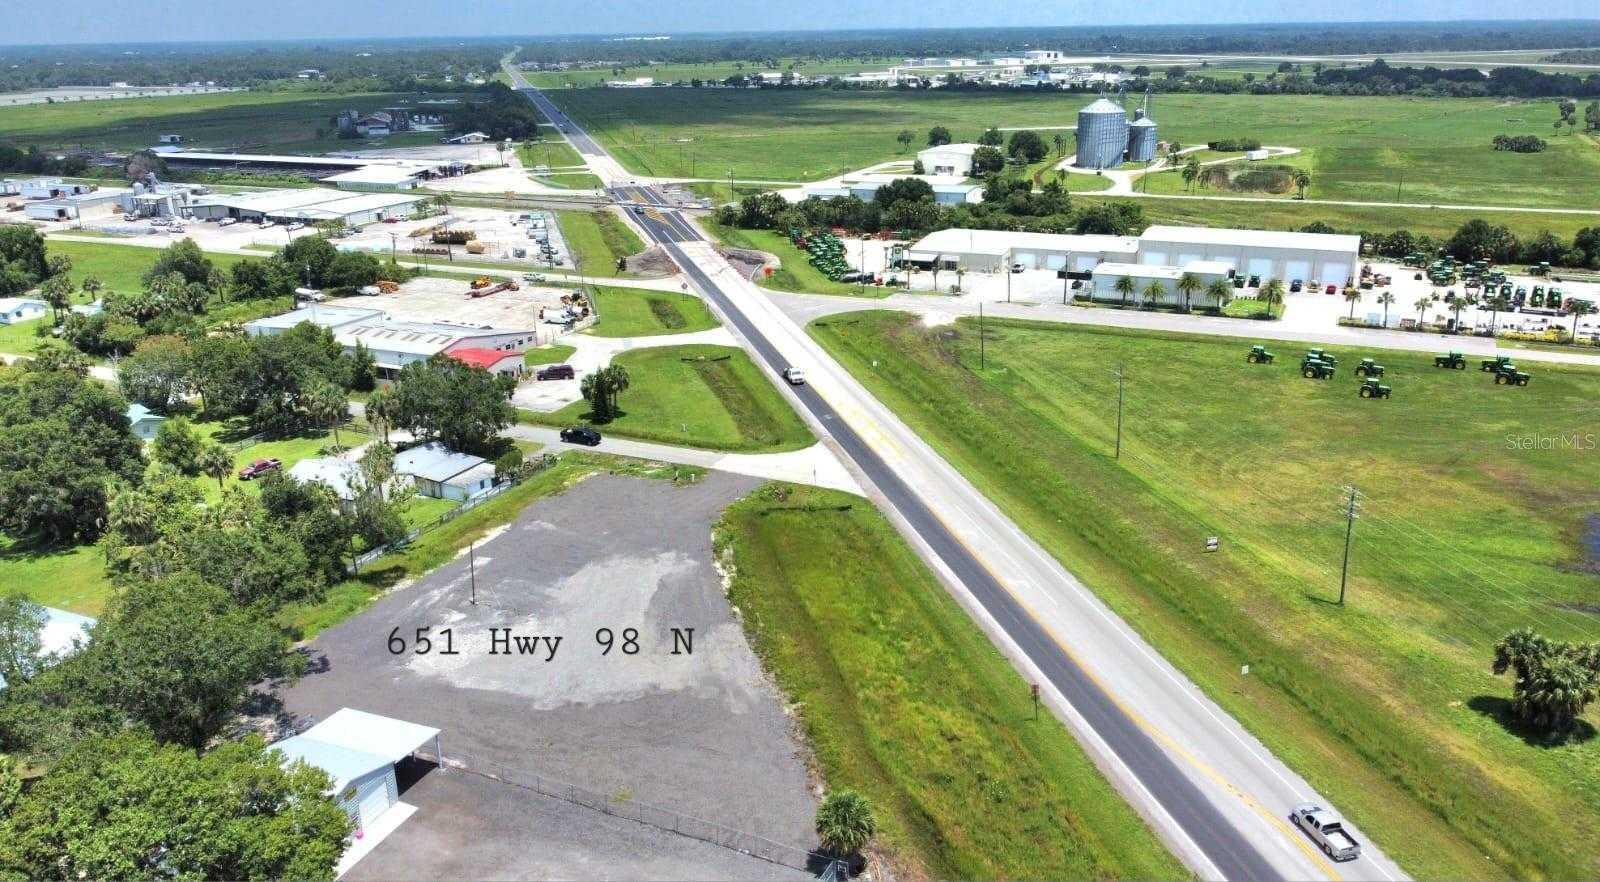 651 Hwy 98, Okeechobee, Commercial Land,  for sale, Mixon Real Estate Group, LLC